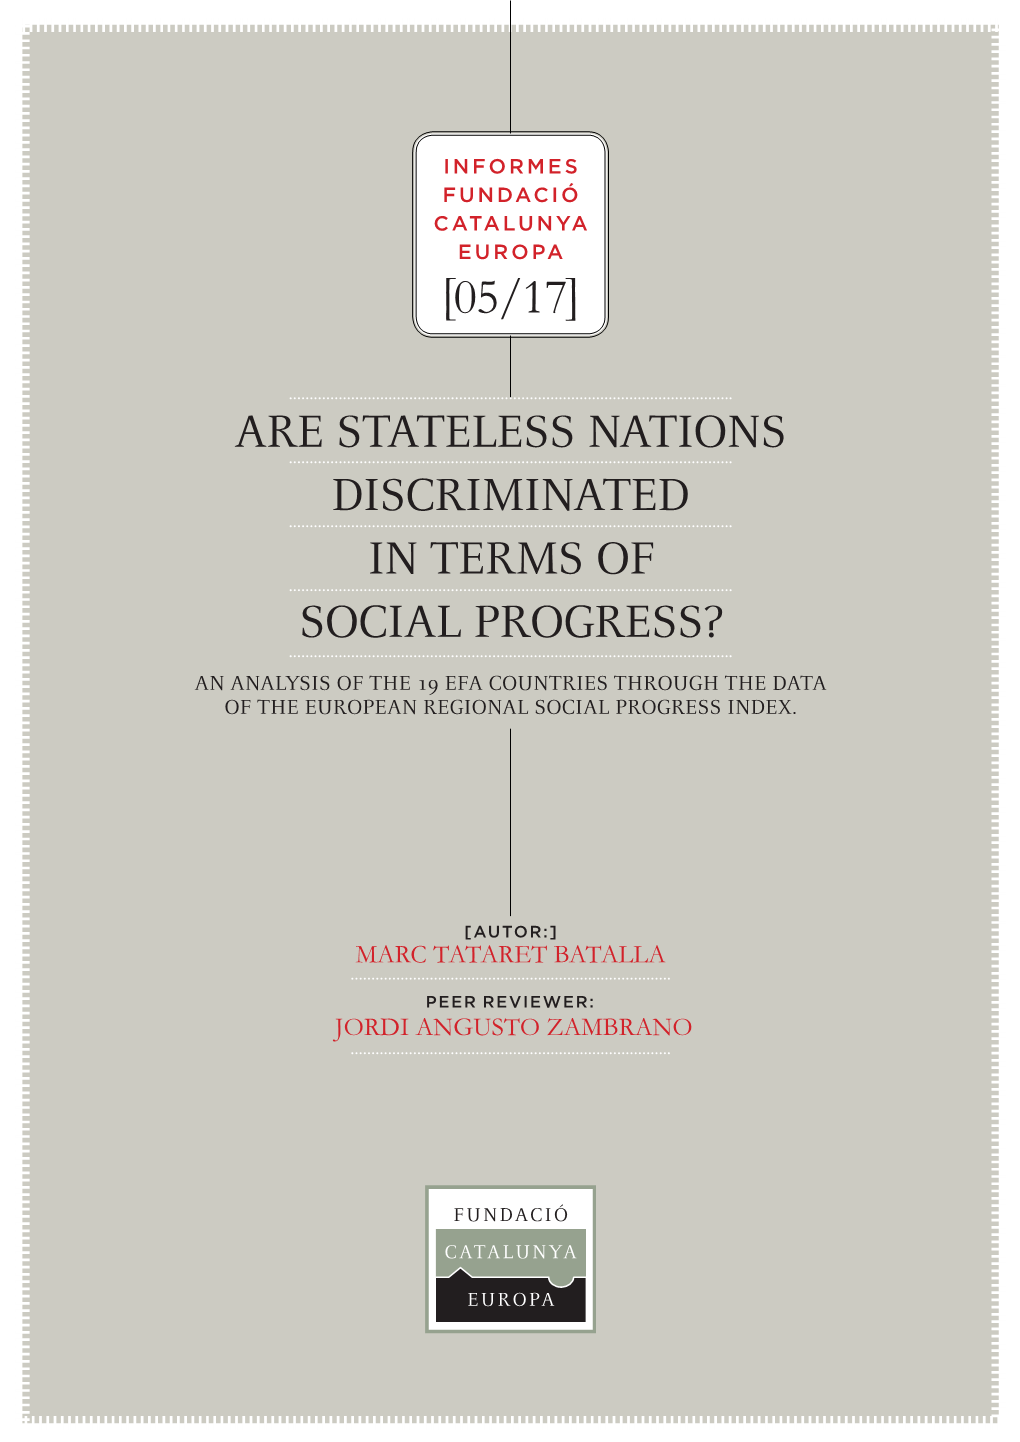 Are Stateless Nations Discriminated in Terms of Social Progress?